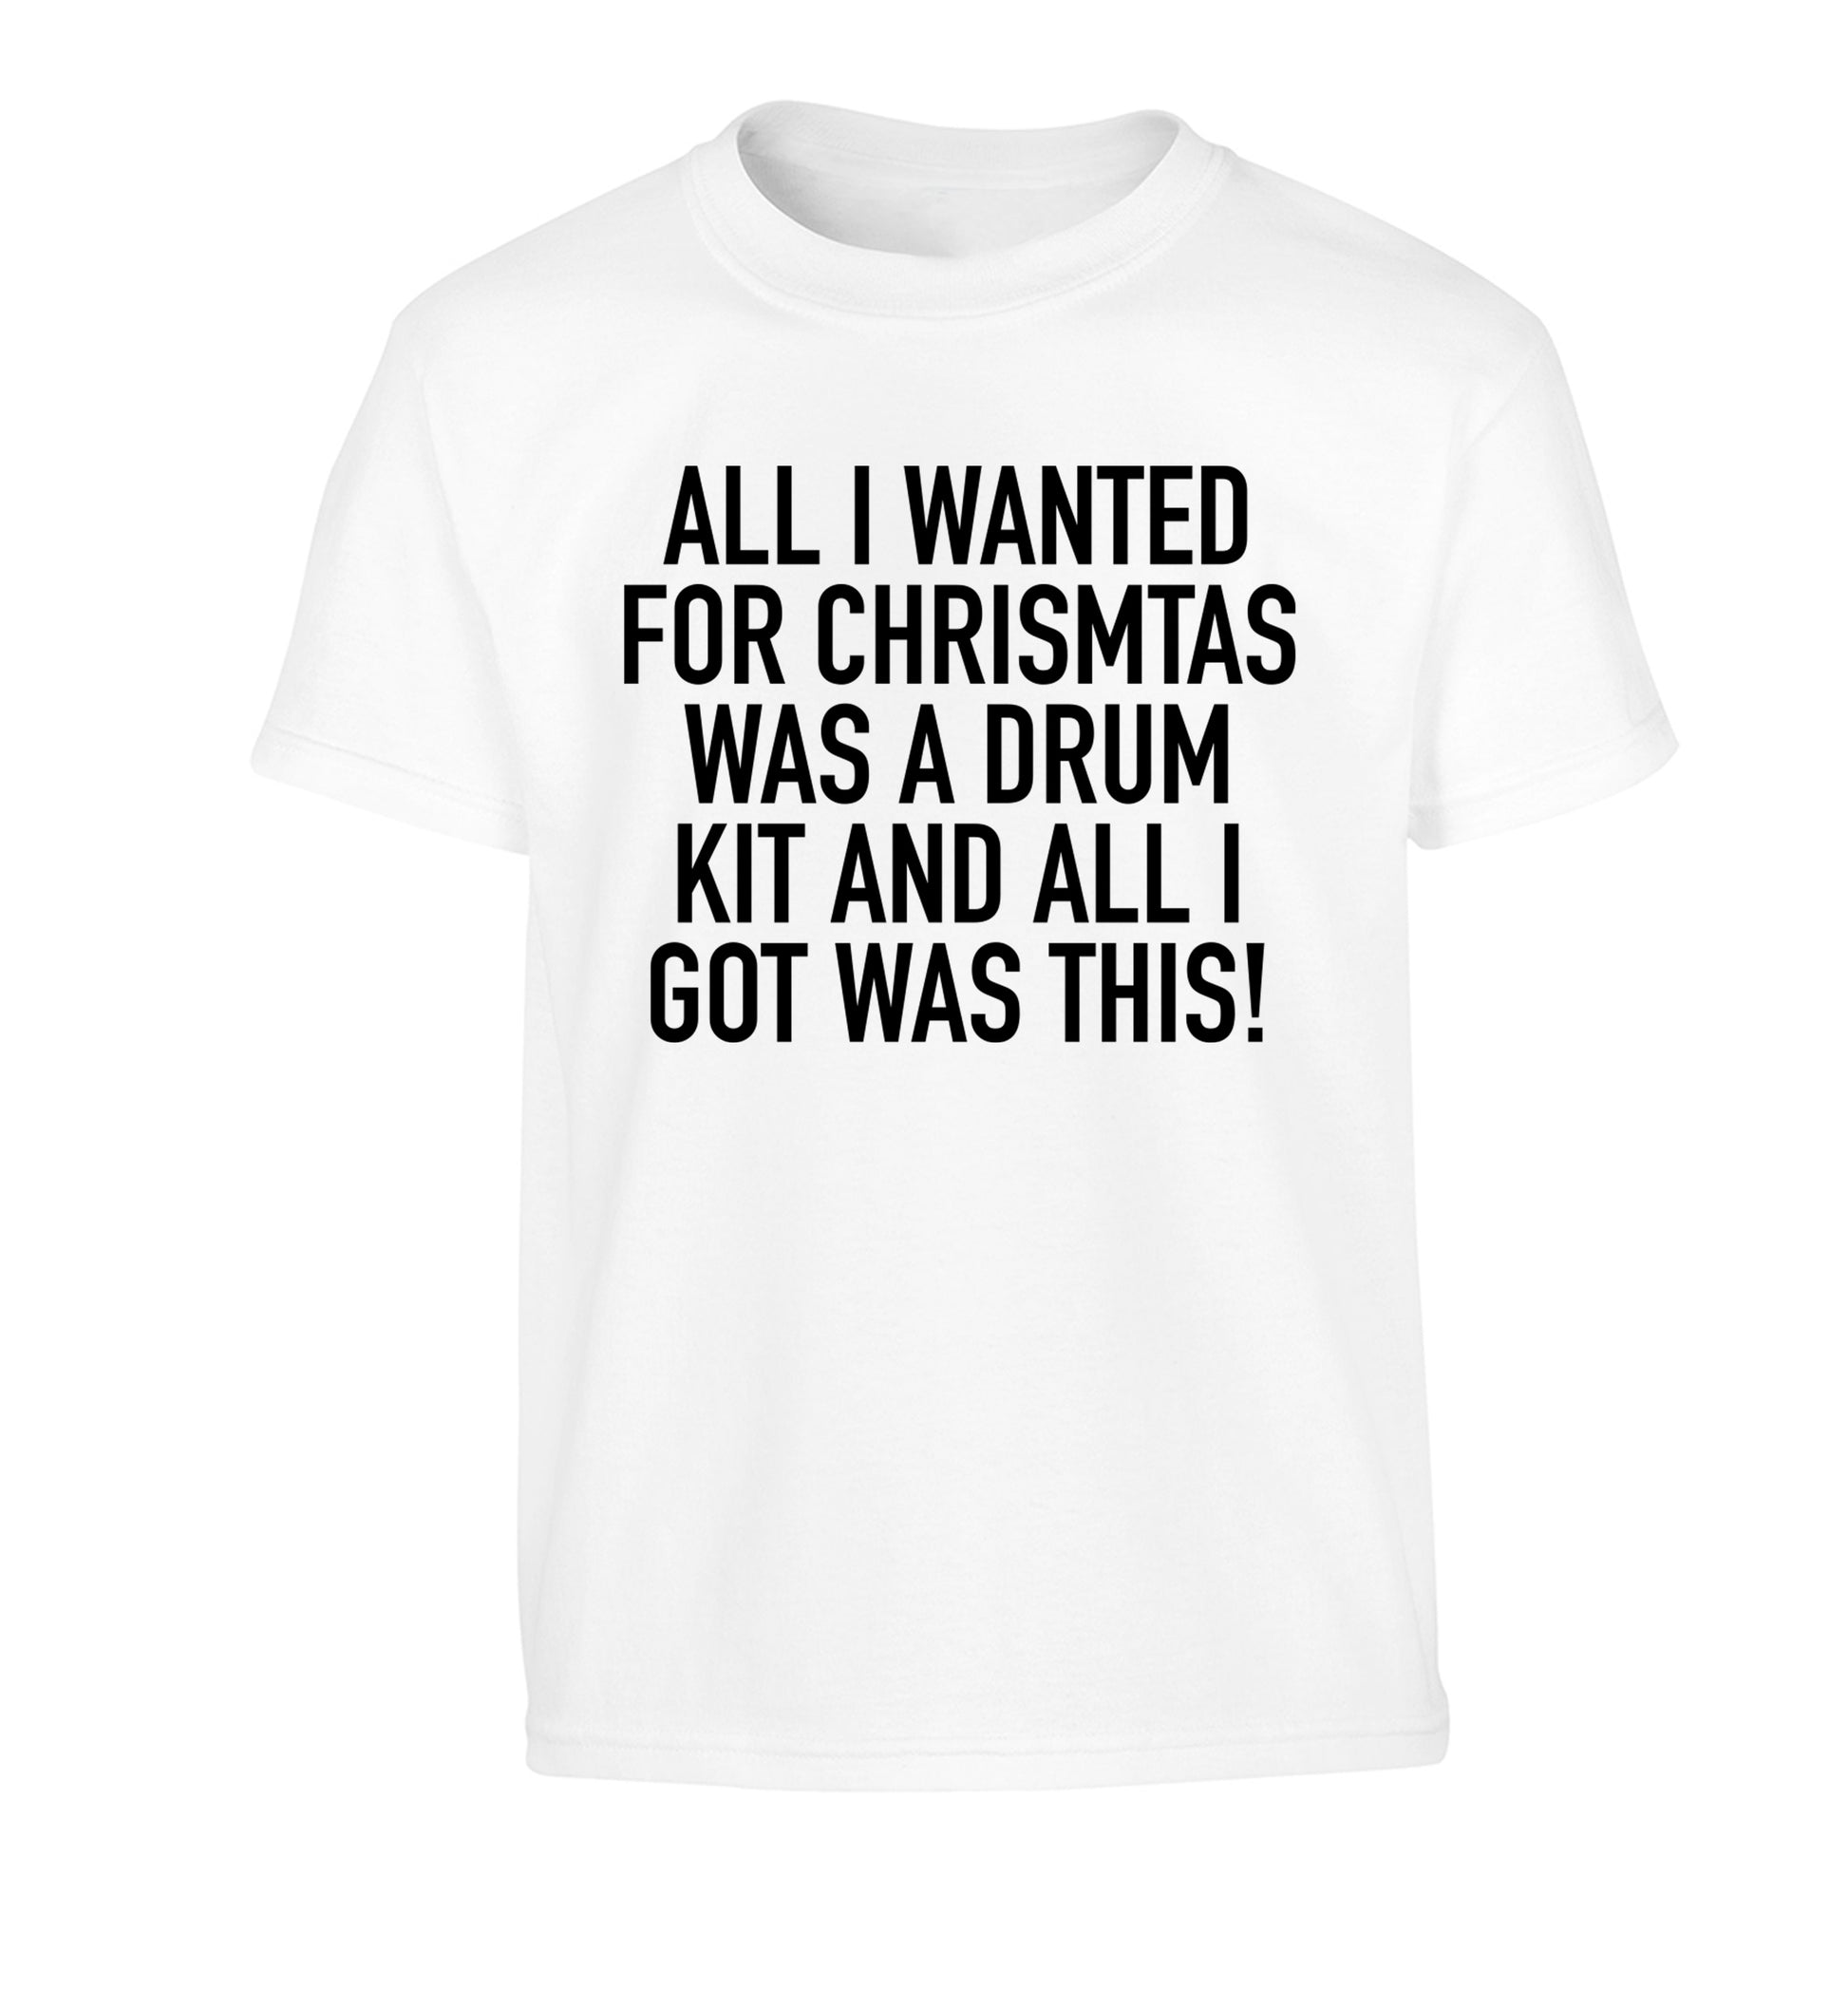 All I wanted for Christmas was a drum kit and all I got was this! Children's white Tshirt 12-14 Years